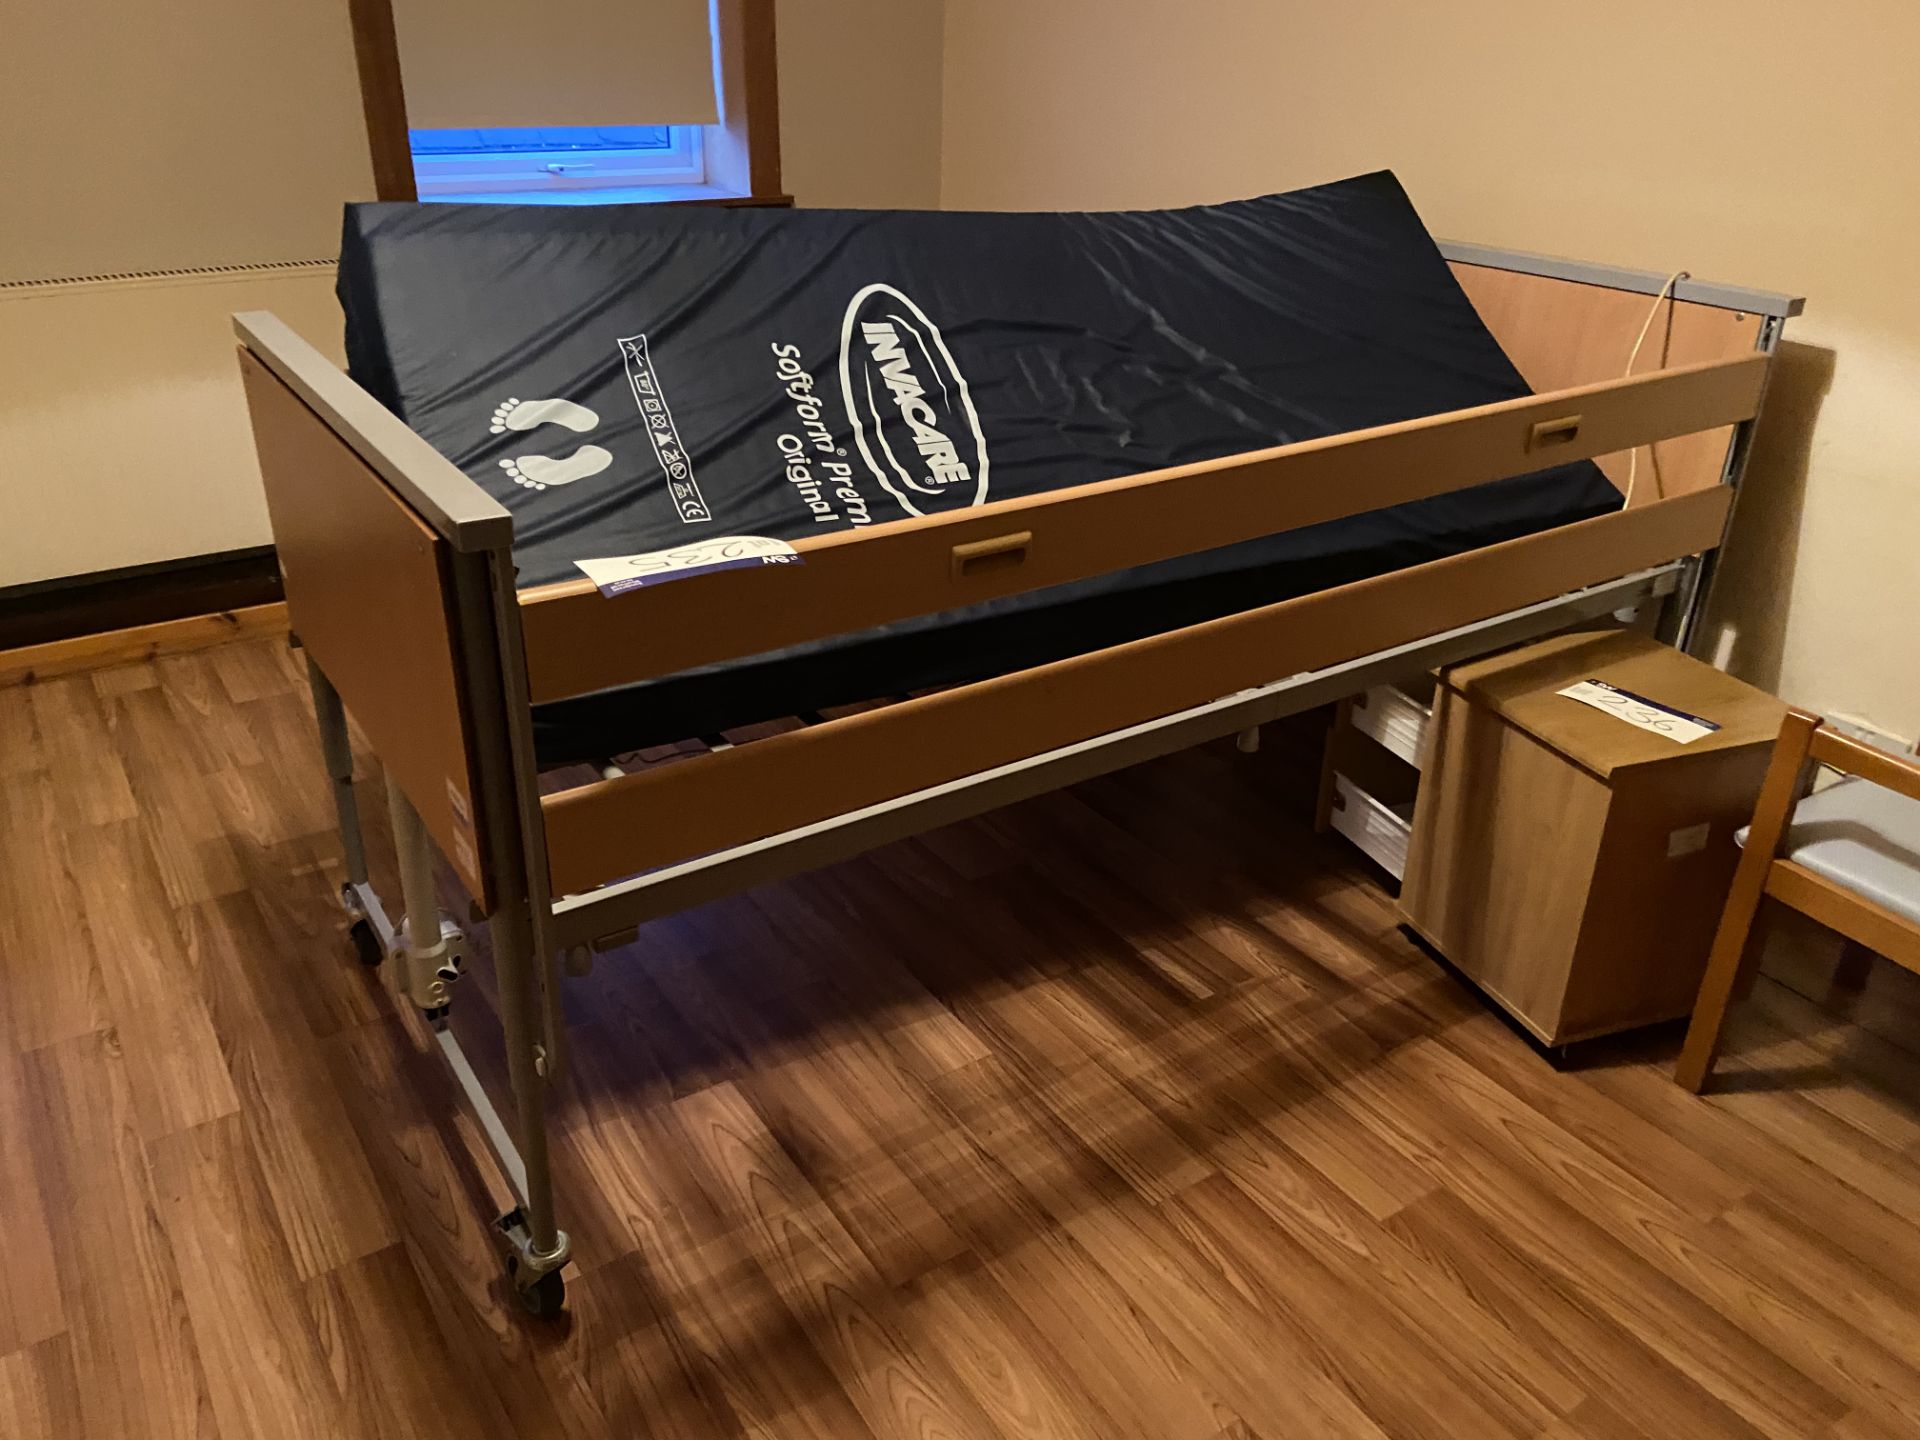 Invacare Mobile Adjustable Height Bed Frame, with Invacare soft foam premier mattress (Room 30)